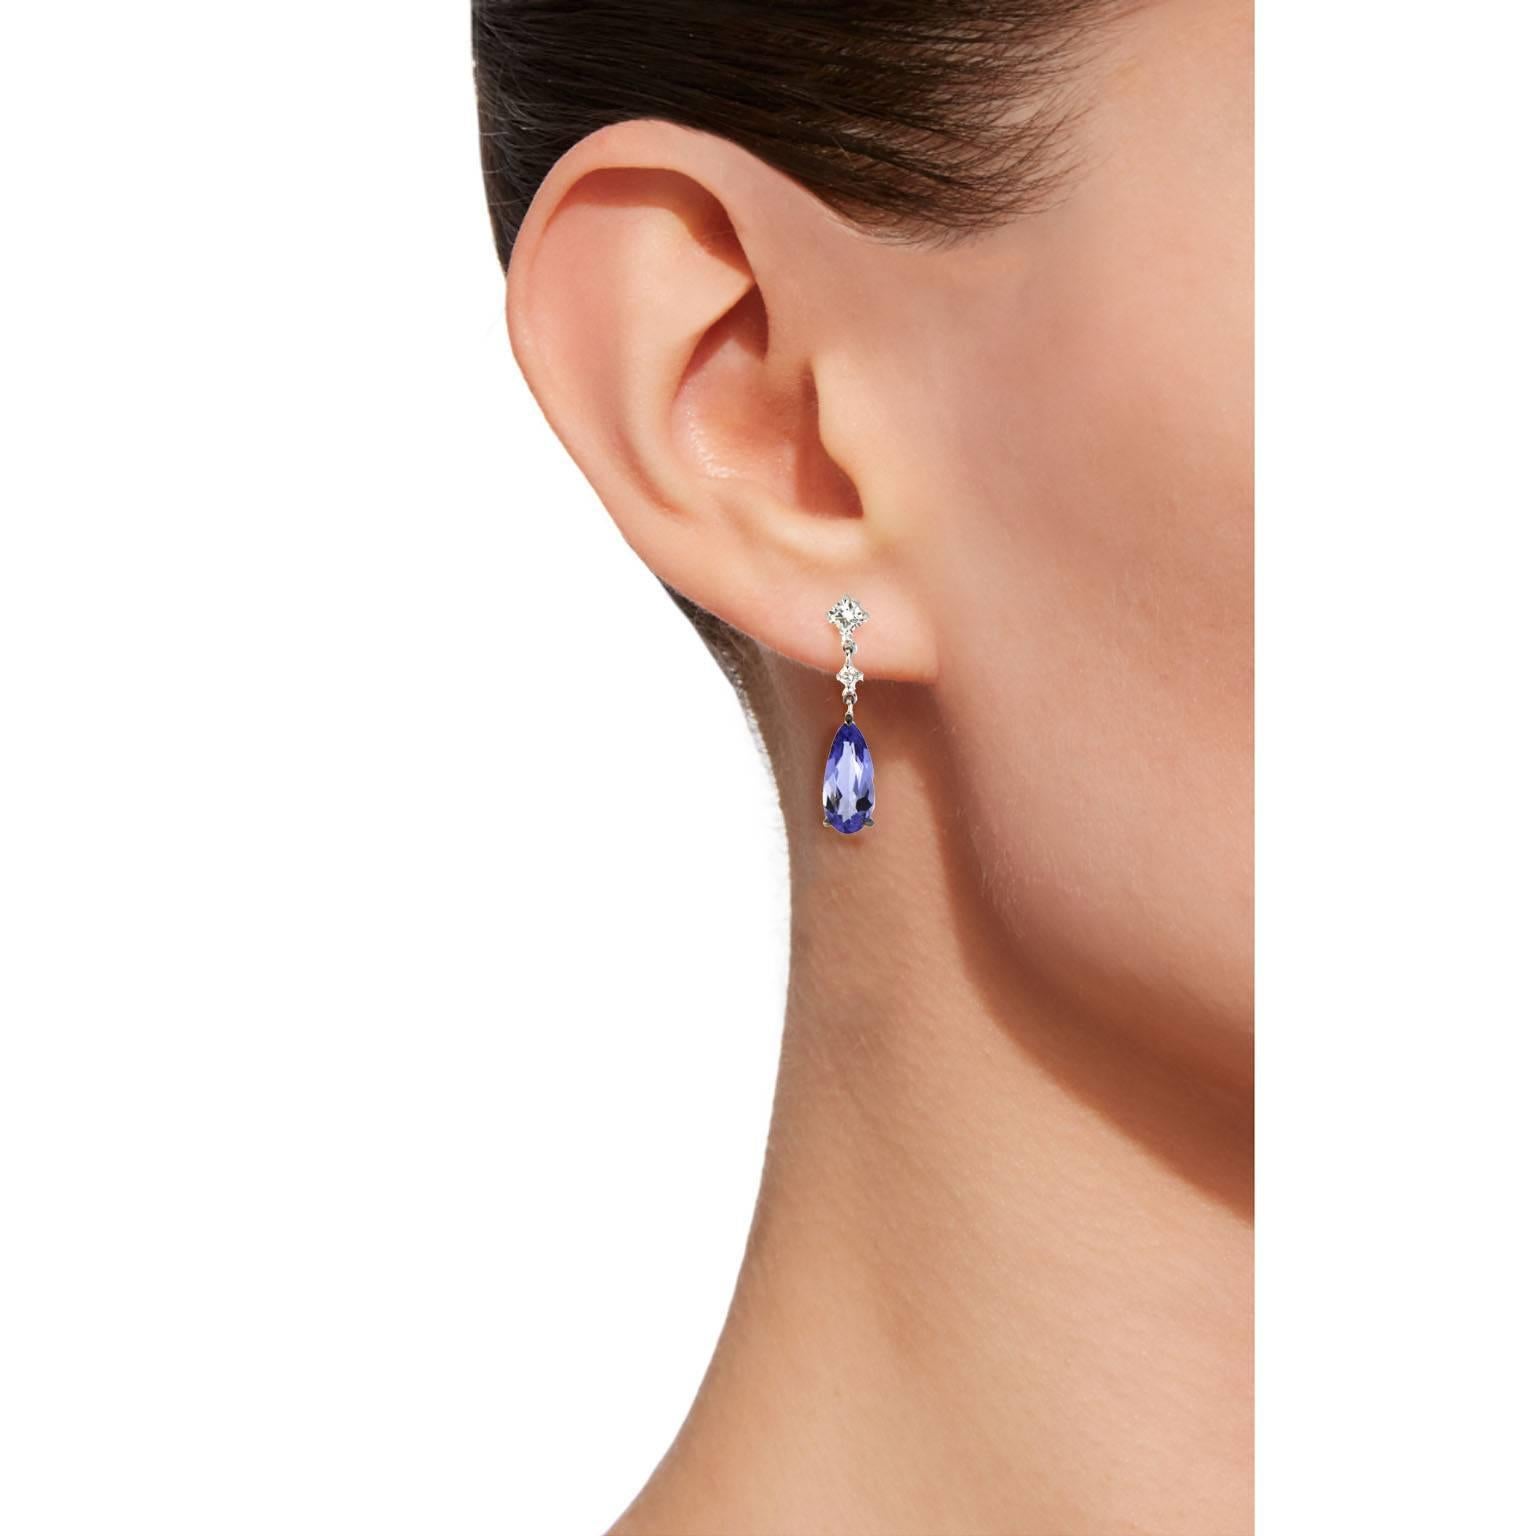 Jona design collection, hand crafted in Italy, 18 karat white gold drop earrings set with 2 drop cut Tanzanite weighing 3.65 carats and 0.47 carats of White Diamonds, F color, VVS1 clarity.
Dimensions:
1.02 in. H x 0.22 in. W x 0.14 in. D
25 mm. H x